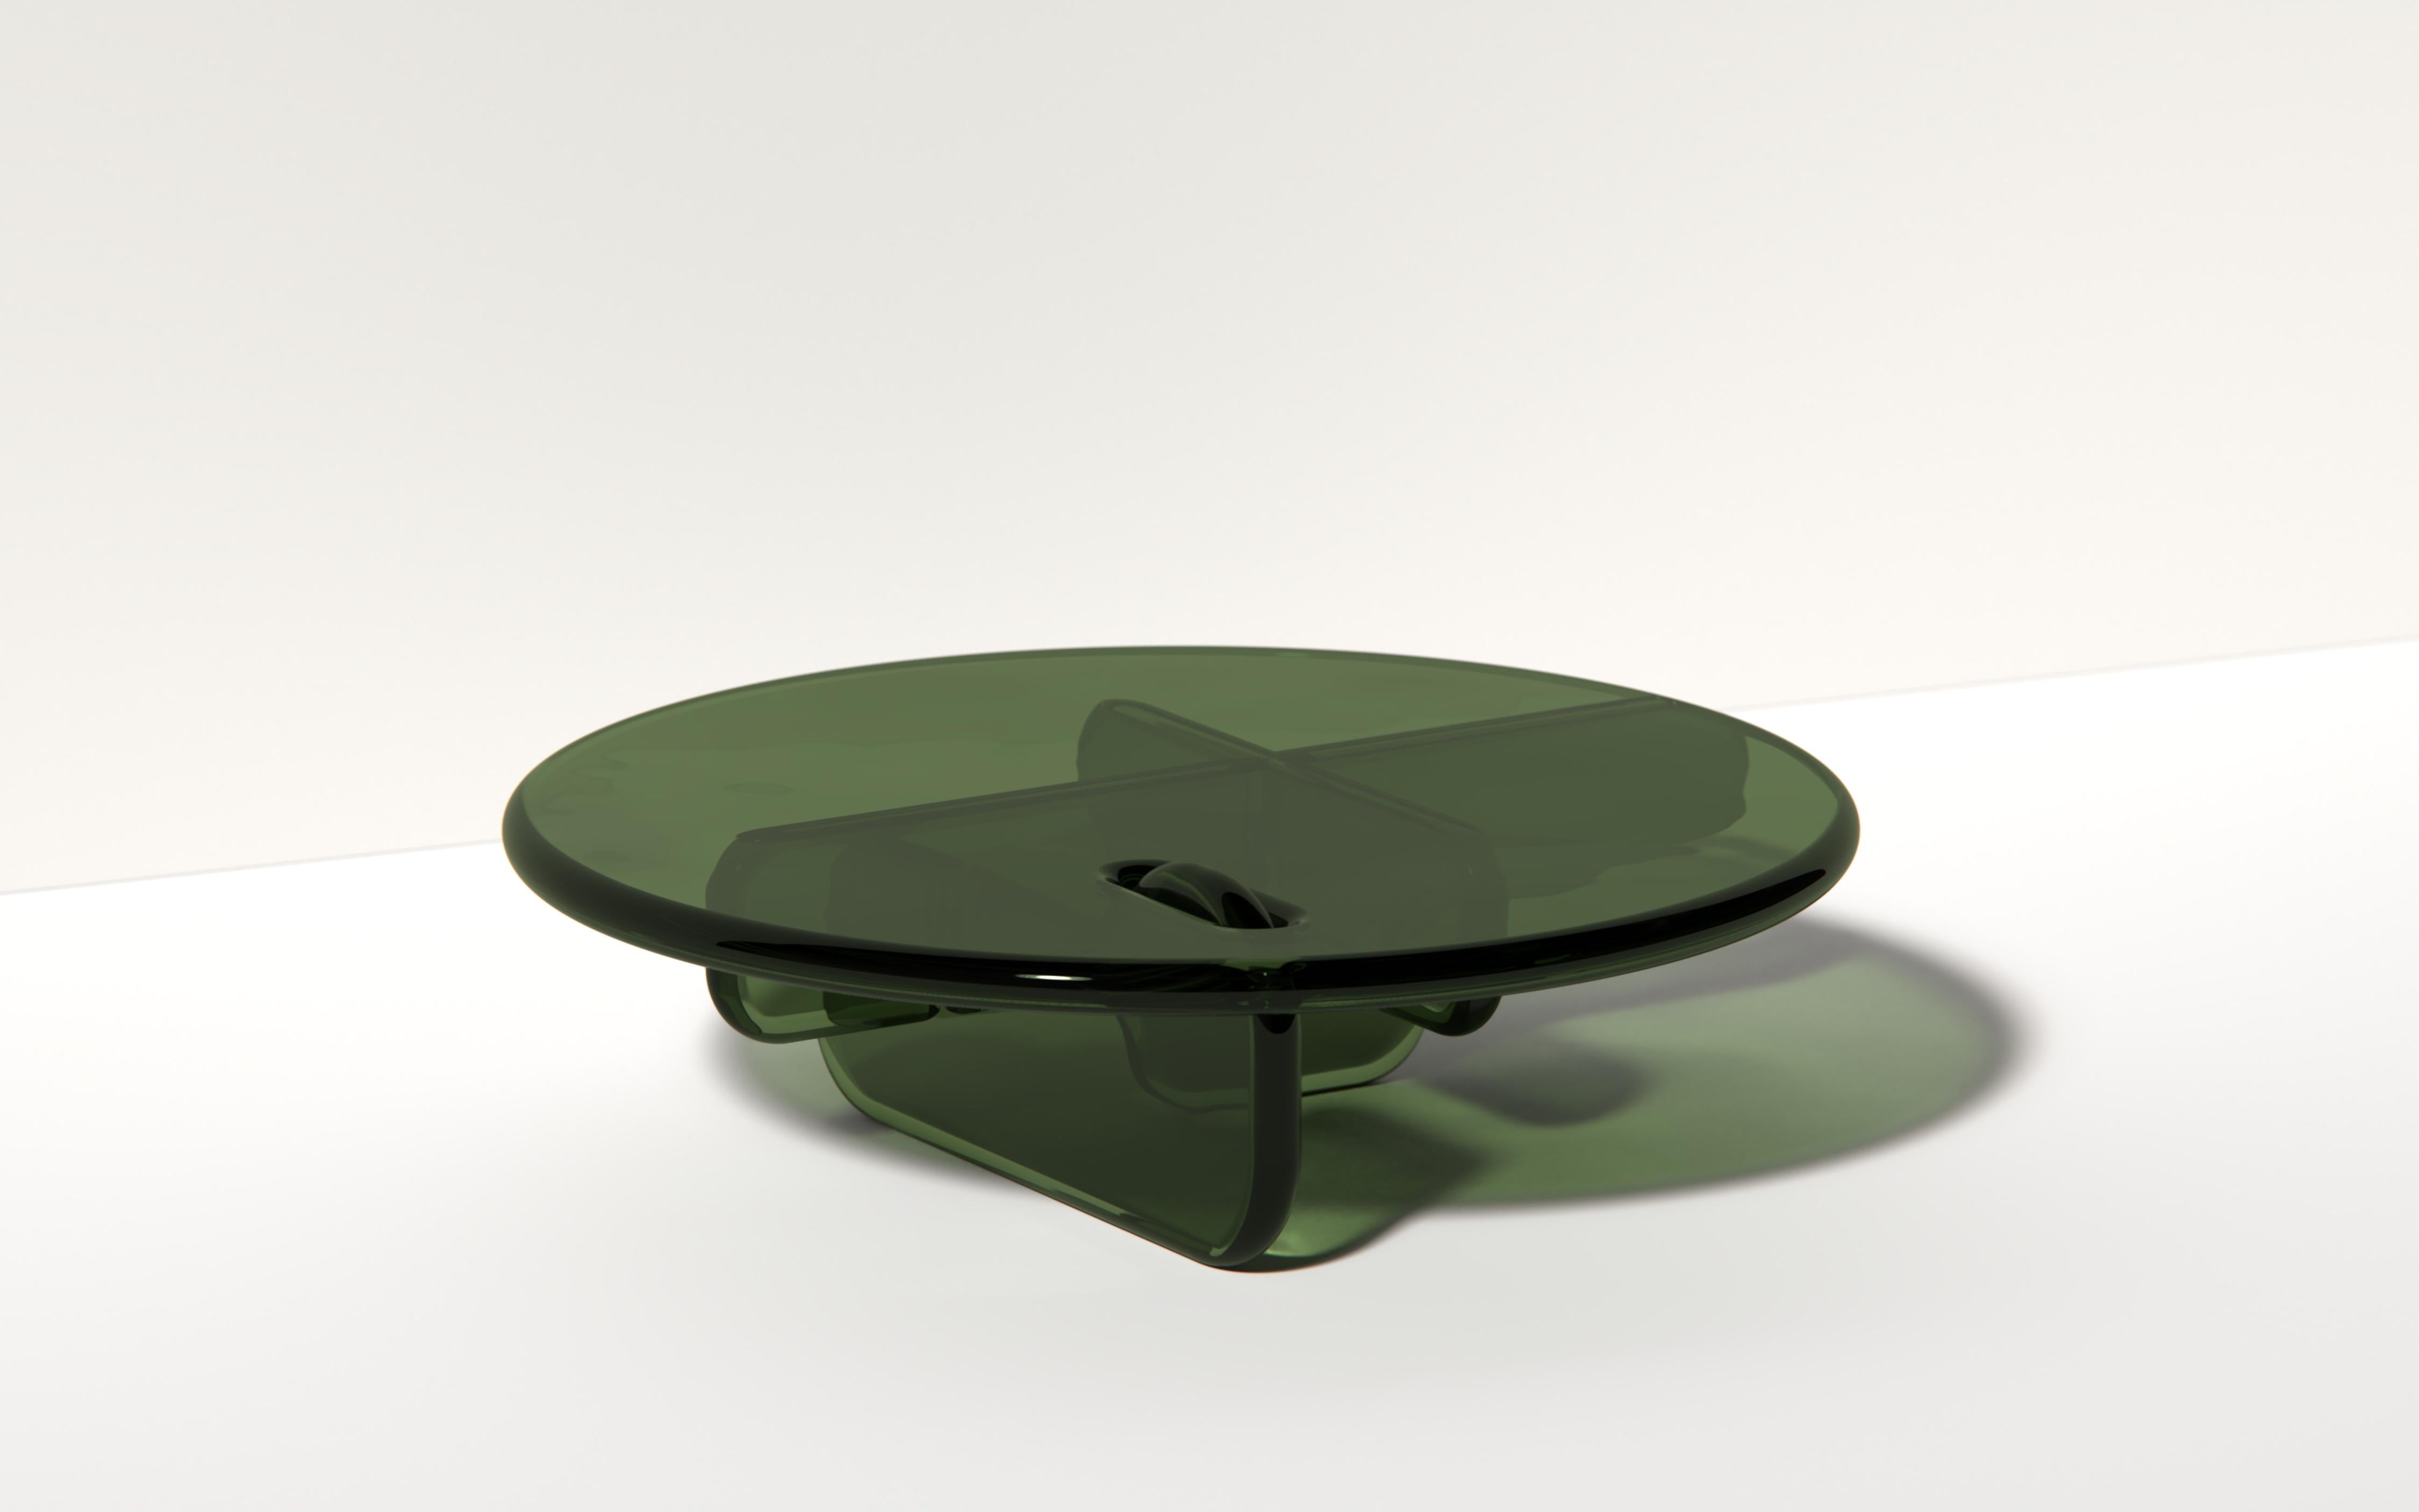 Contemporary Plump Round Coffee Table by Ian Cochran, Represented by Tuleste Factory For Sale